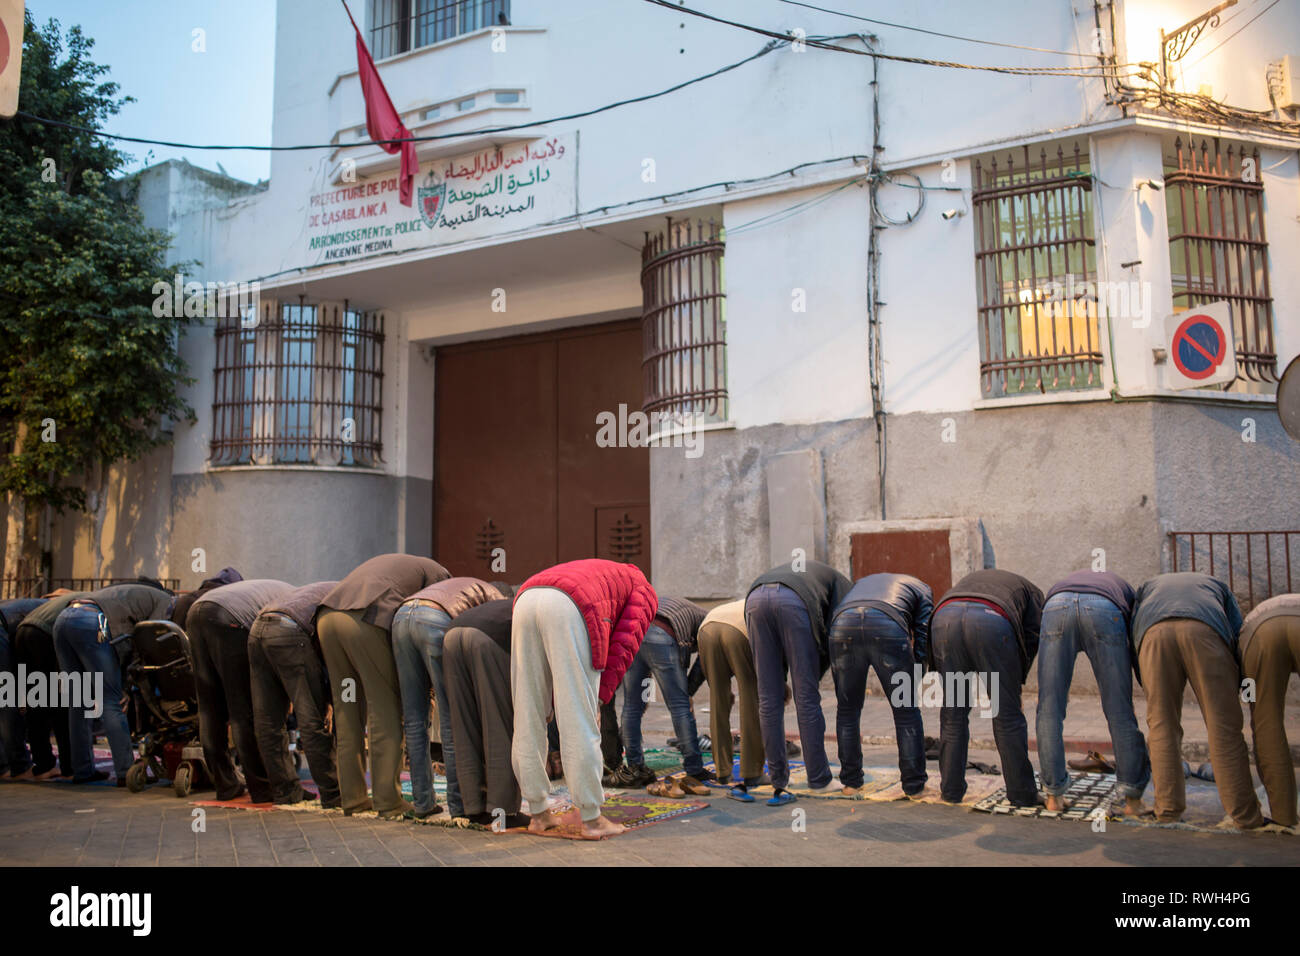 CASABLANCA, MOROCCO - MARCH 5, 2019: People praying on the streets of Casablanca, Morocco. Stock Photo